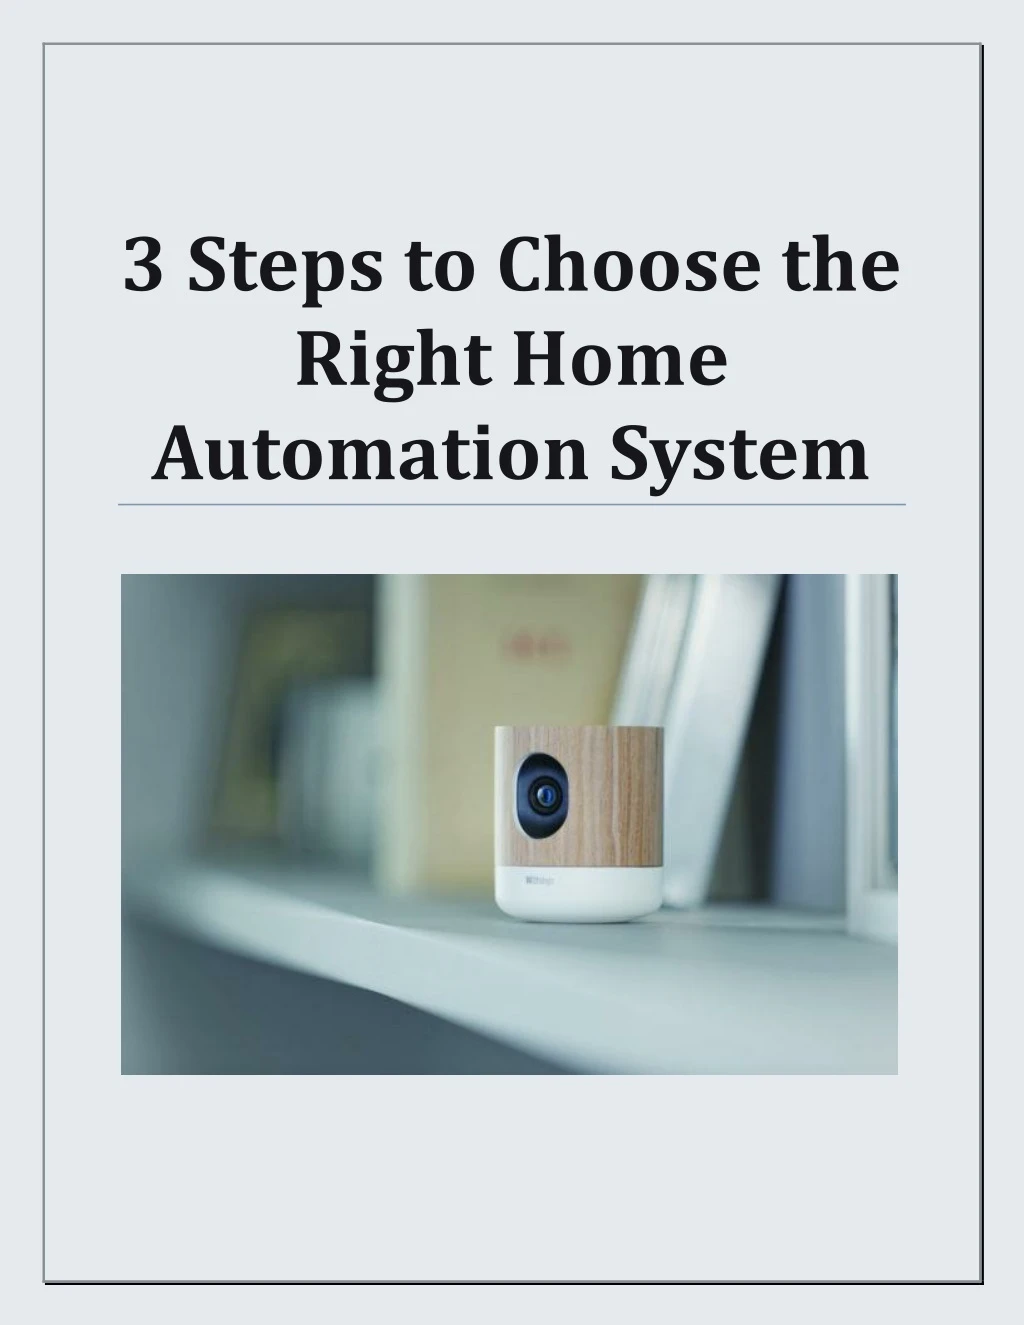 3 steps to choose the right home automation system